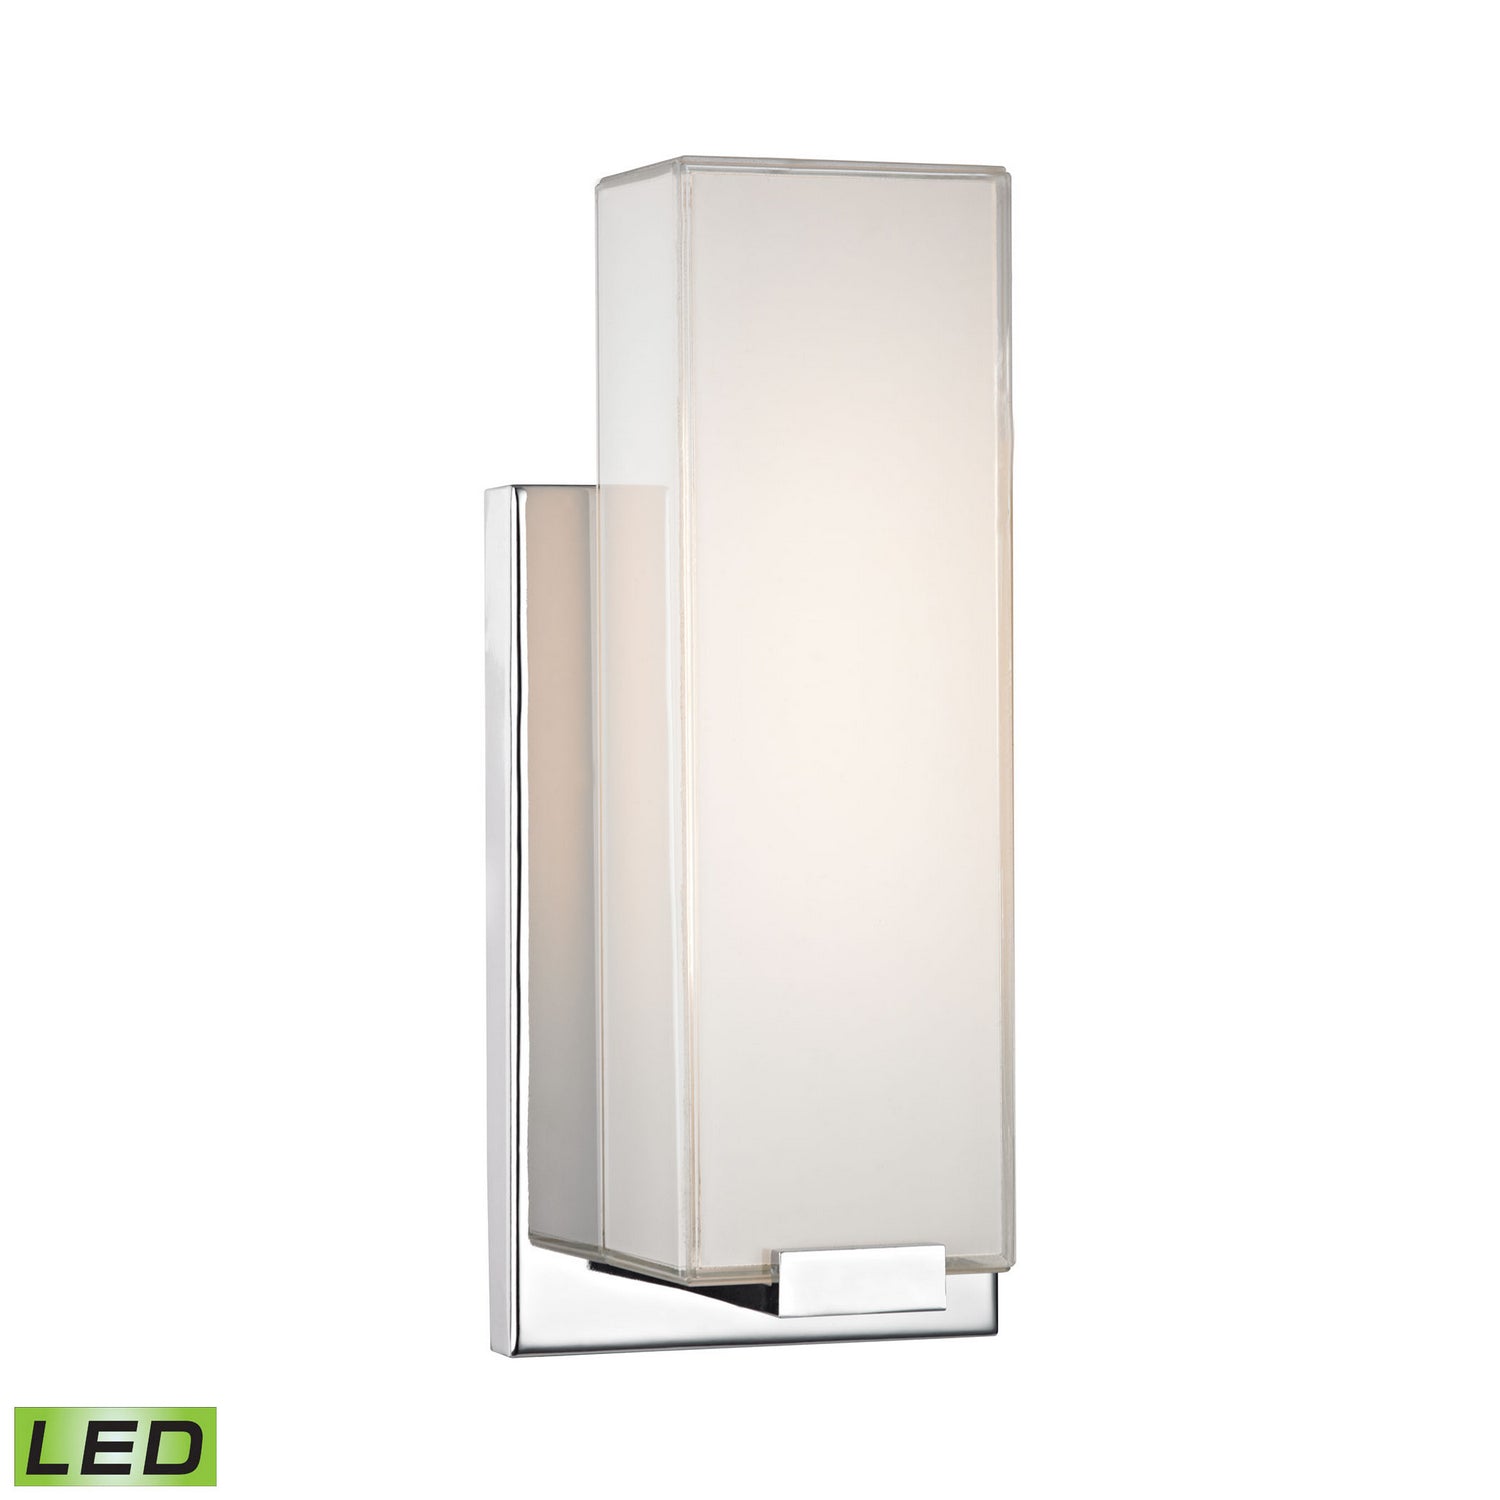 ELK Home - WSL1601-PW-15 - LED Wall Sconce - Midtown - Chrome